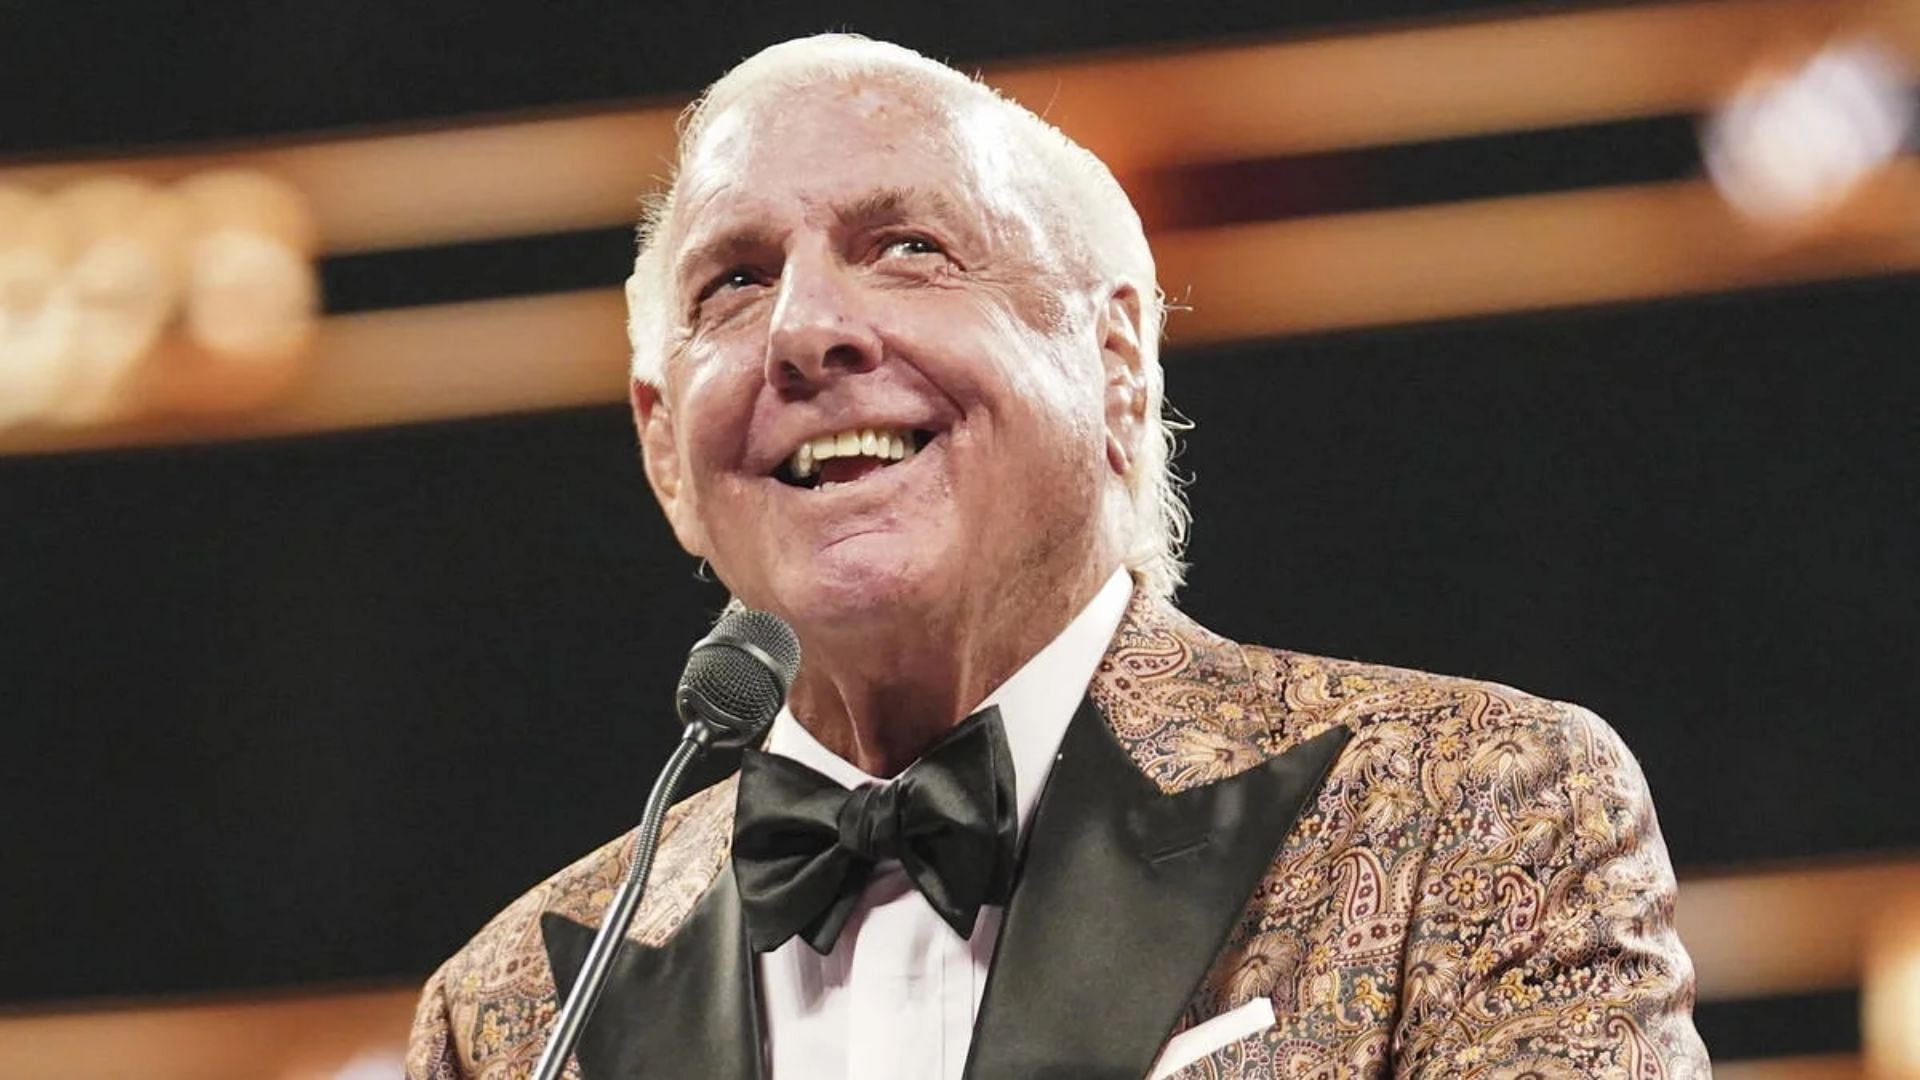 WWE Hall of Famer, &quot;The Nature Boy&quot; Ric Flair